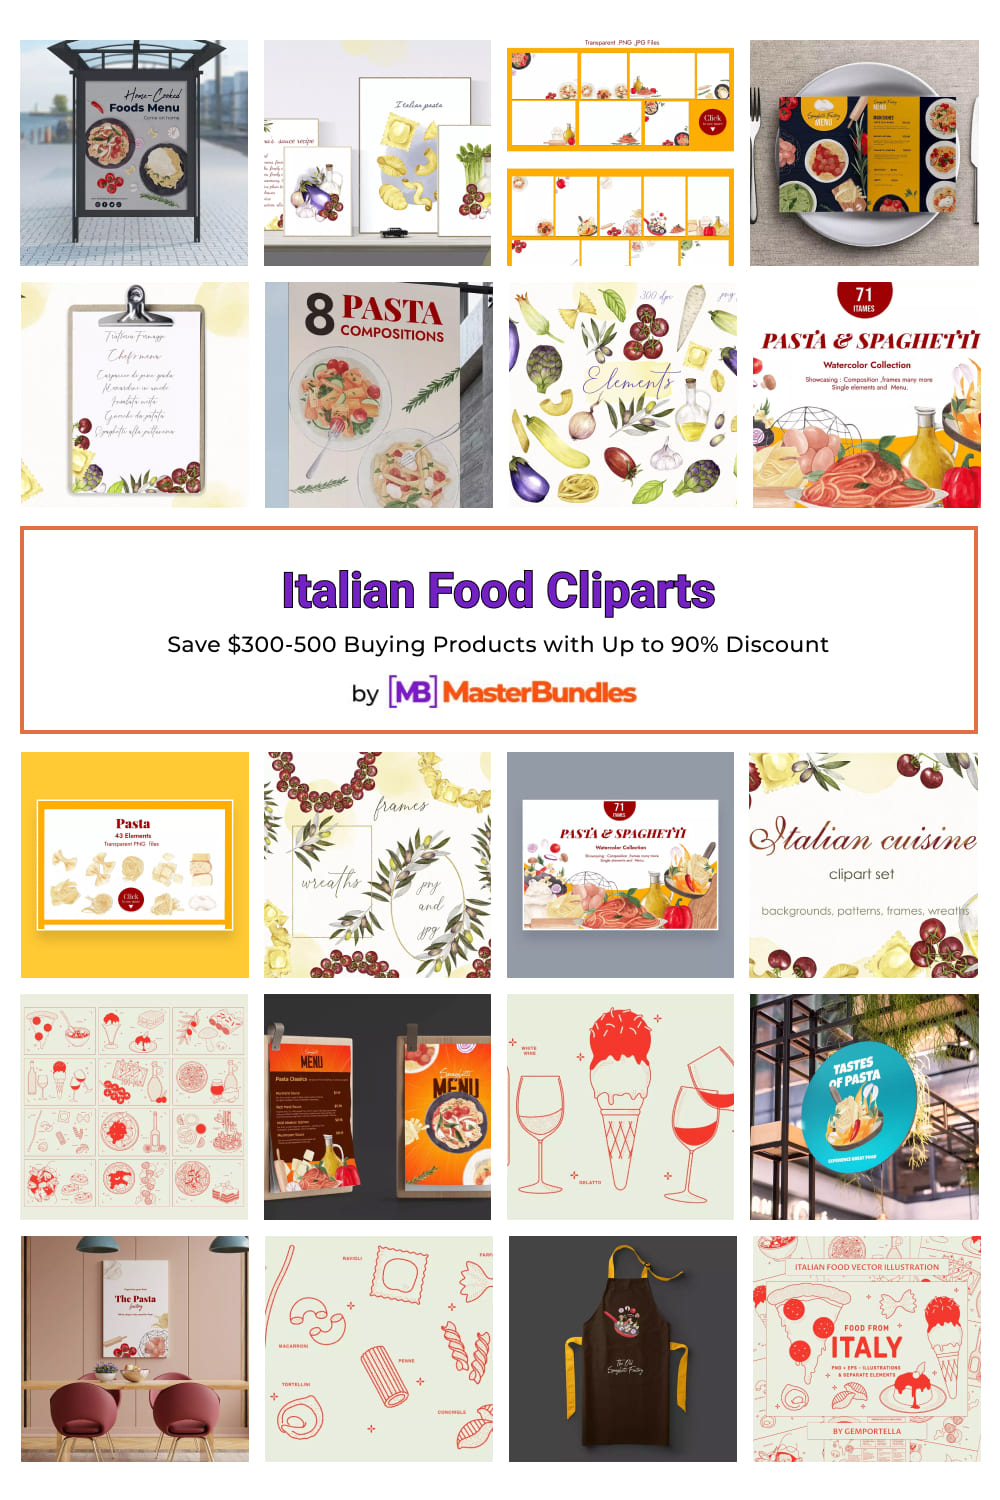 Italian Food Cliparts for Pinterest.